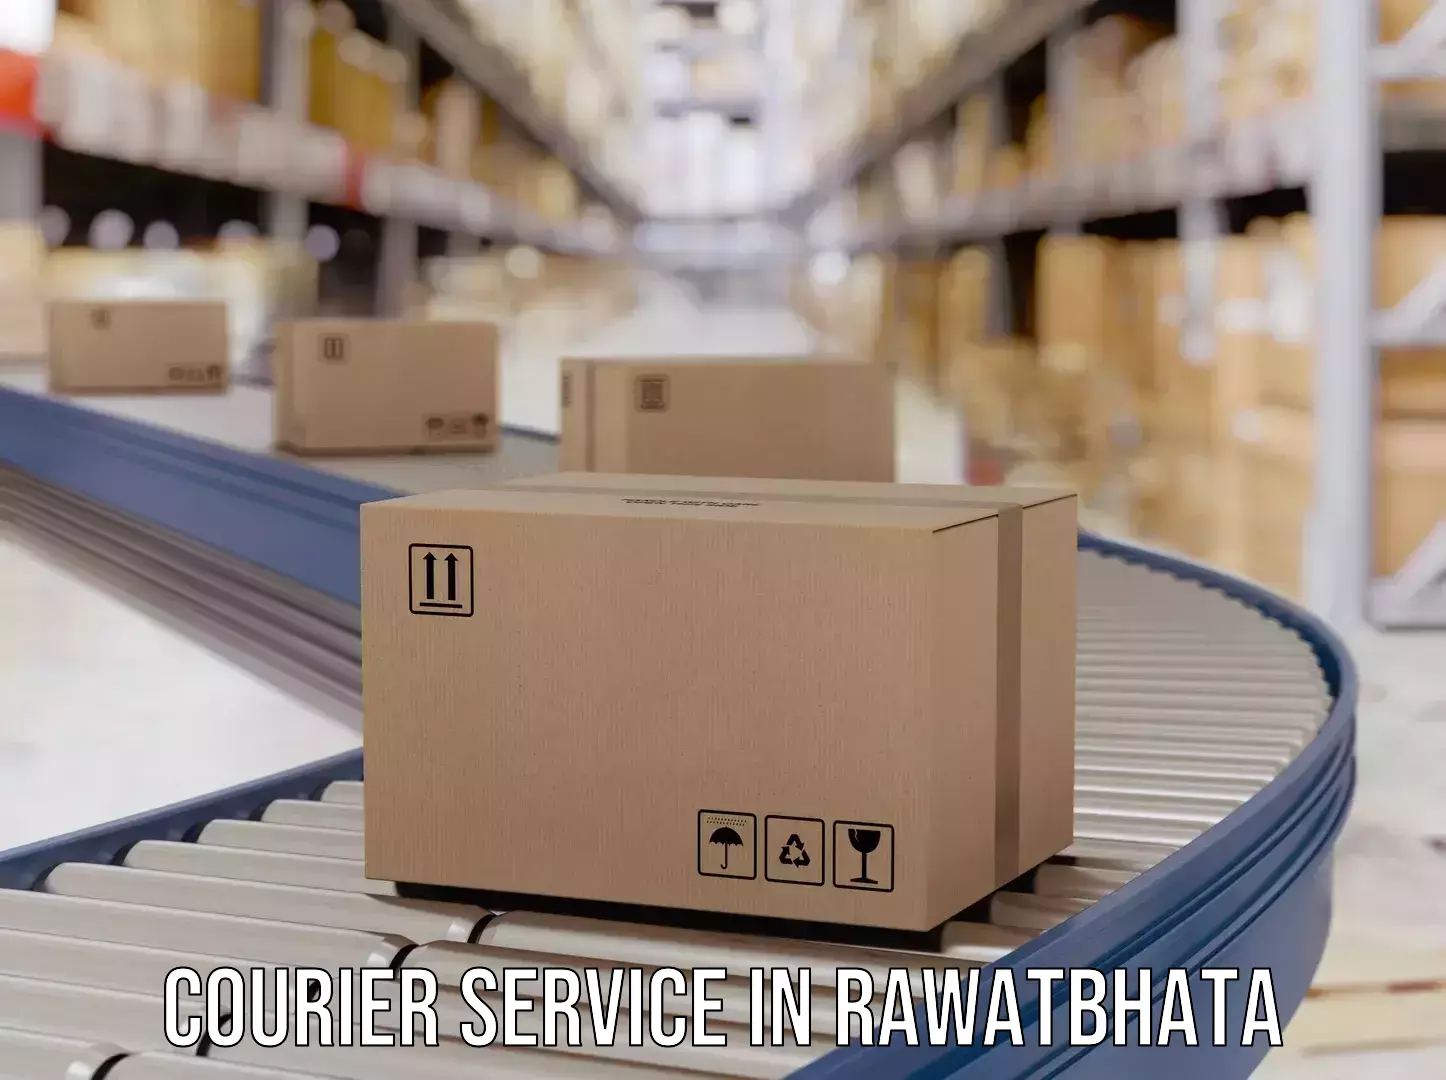 Automated parcel services in Rawatbhata